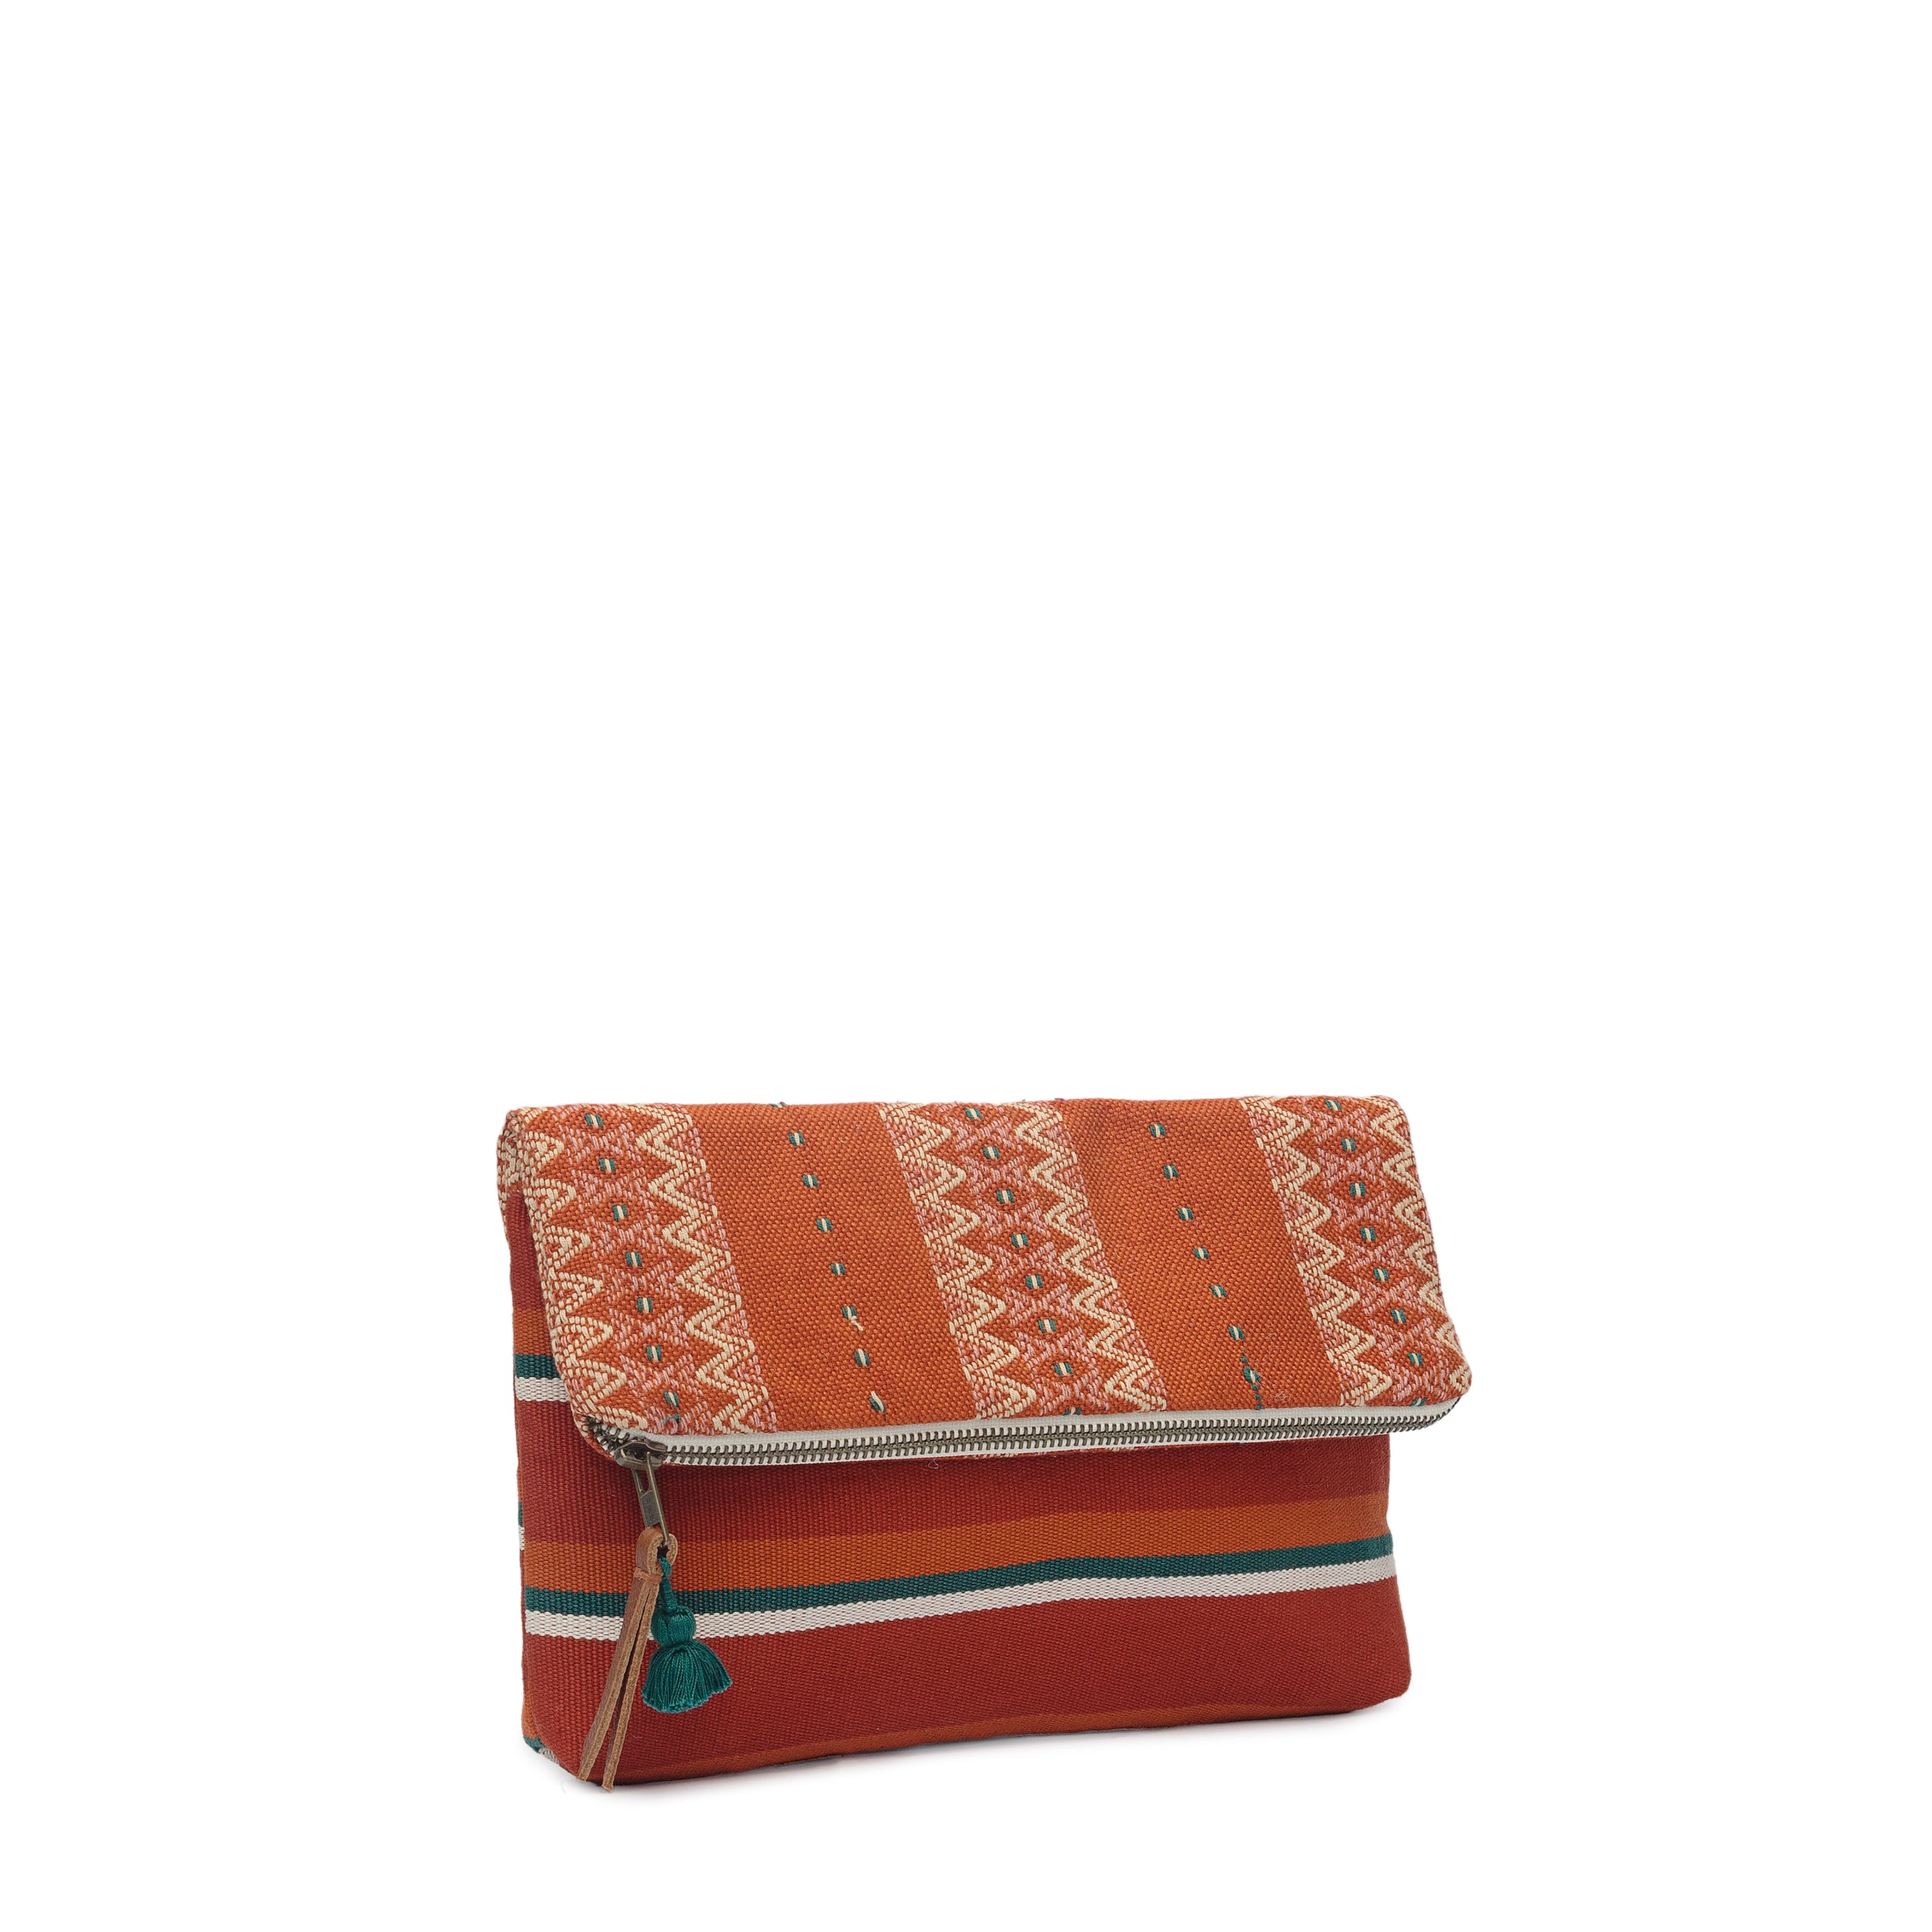 A left sided view of the Celia Clutch in Ginger color. The Clutch has two patterns, one with a red and green vertical striped fabric, and the other with a zigzag yellow and orange pattern. It has a mini green tassel and a leather zipper pull.